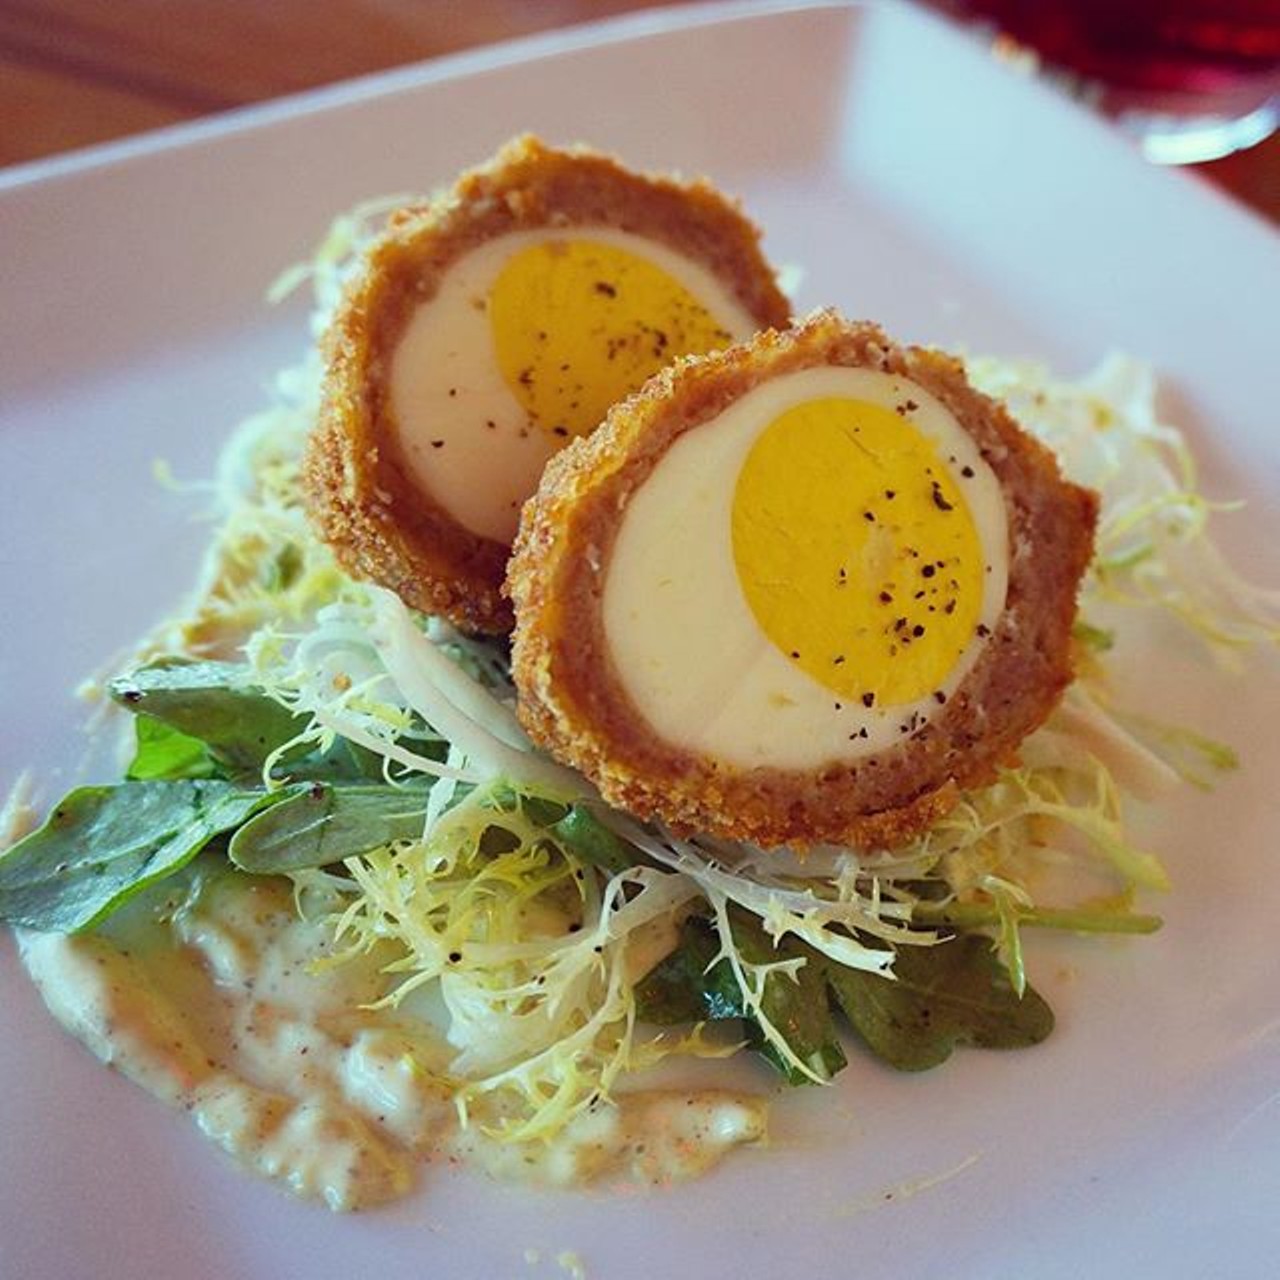 Scotched egg from Epcot's Rose & Crown.
Photo via @jabead